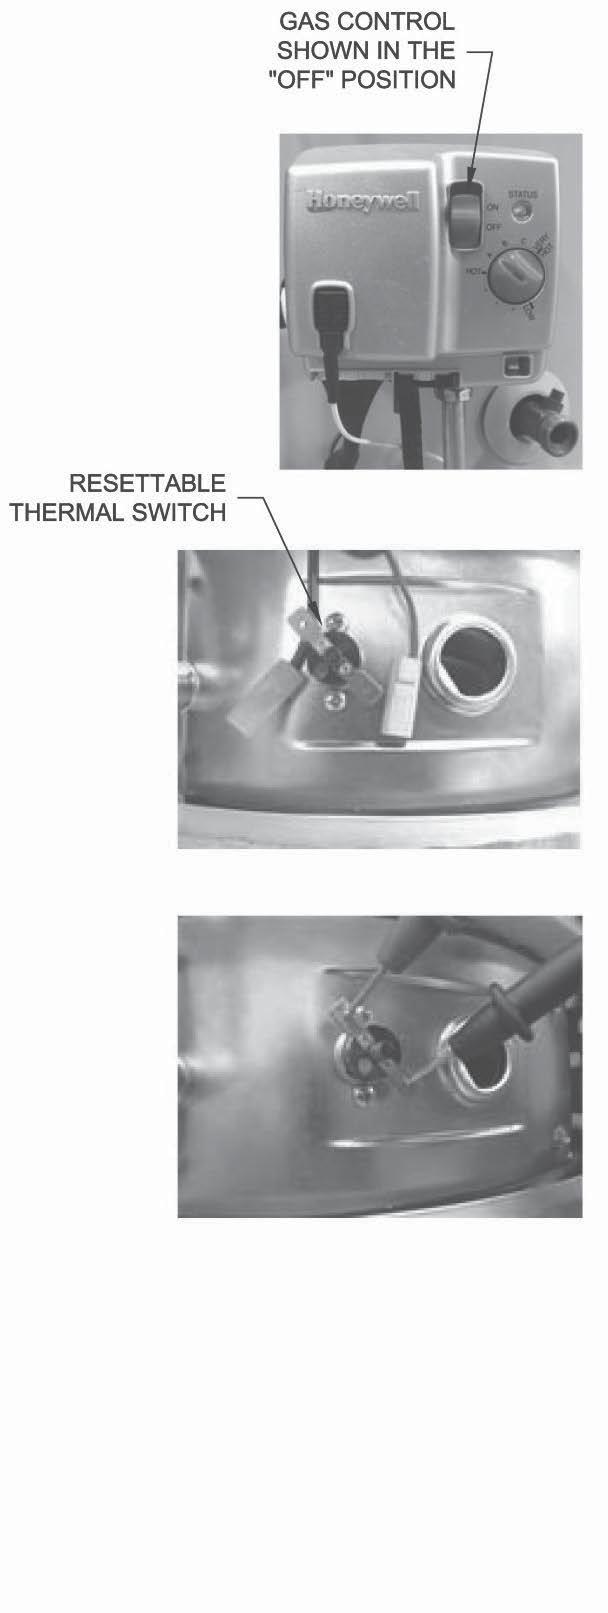 Resettable Thermal Switch Continuity Testing Step 1. Step 2. Step 3. Step 4. Step 5. Step 6. Move the gas control power switch to the OFF position and unplug the water heater from the wall outlet.